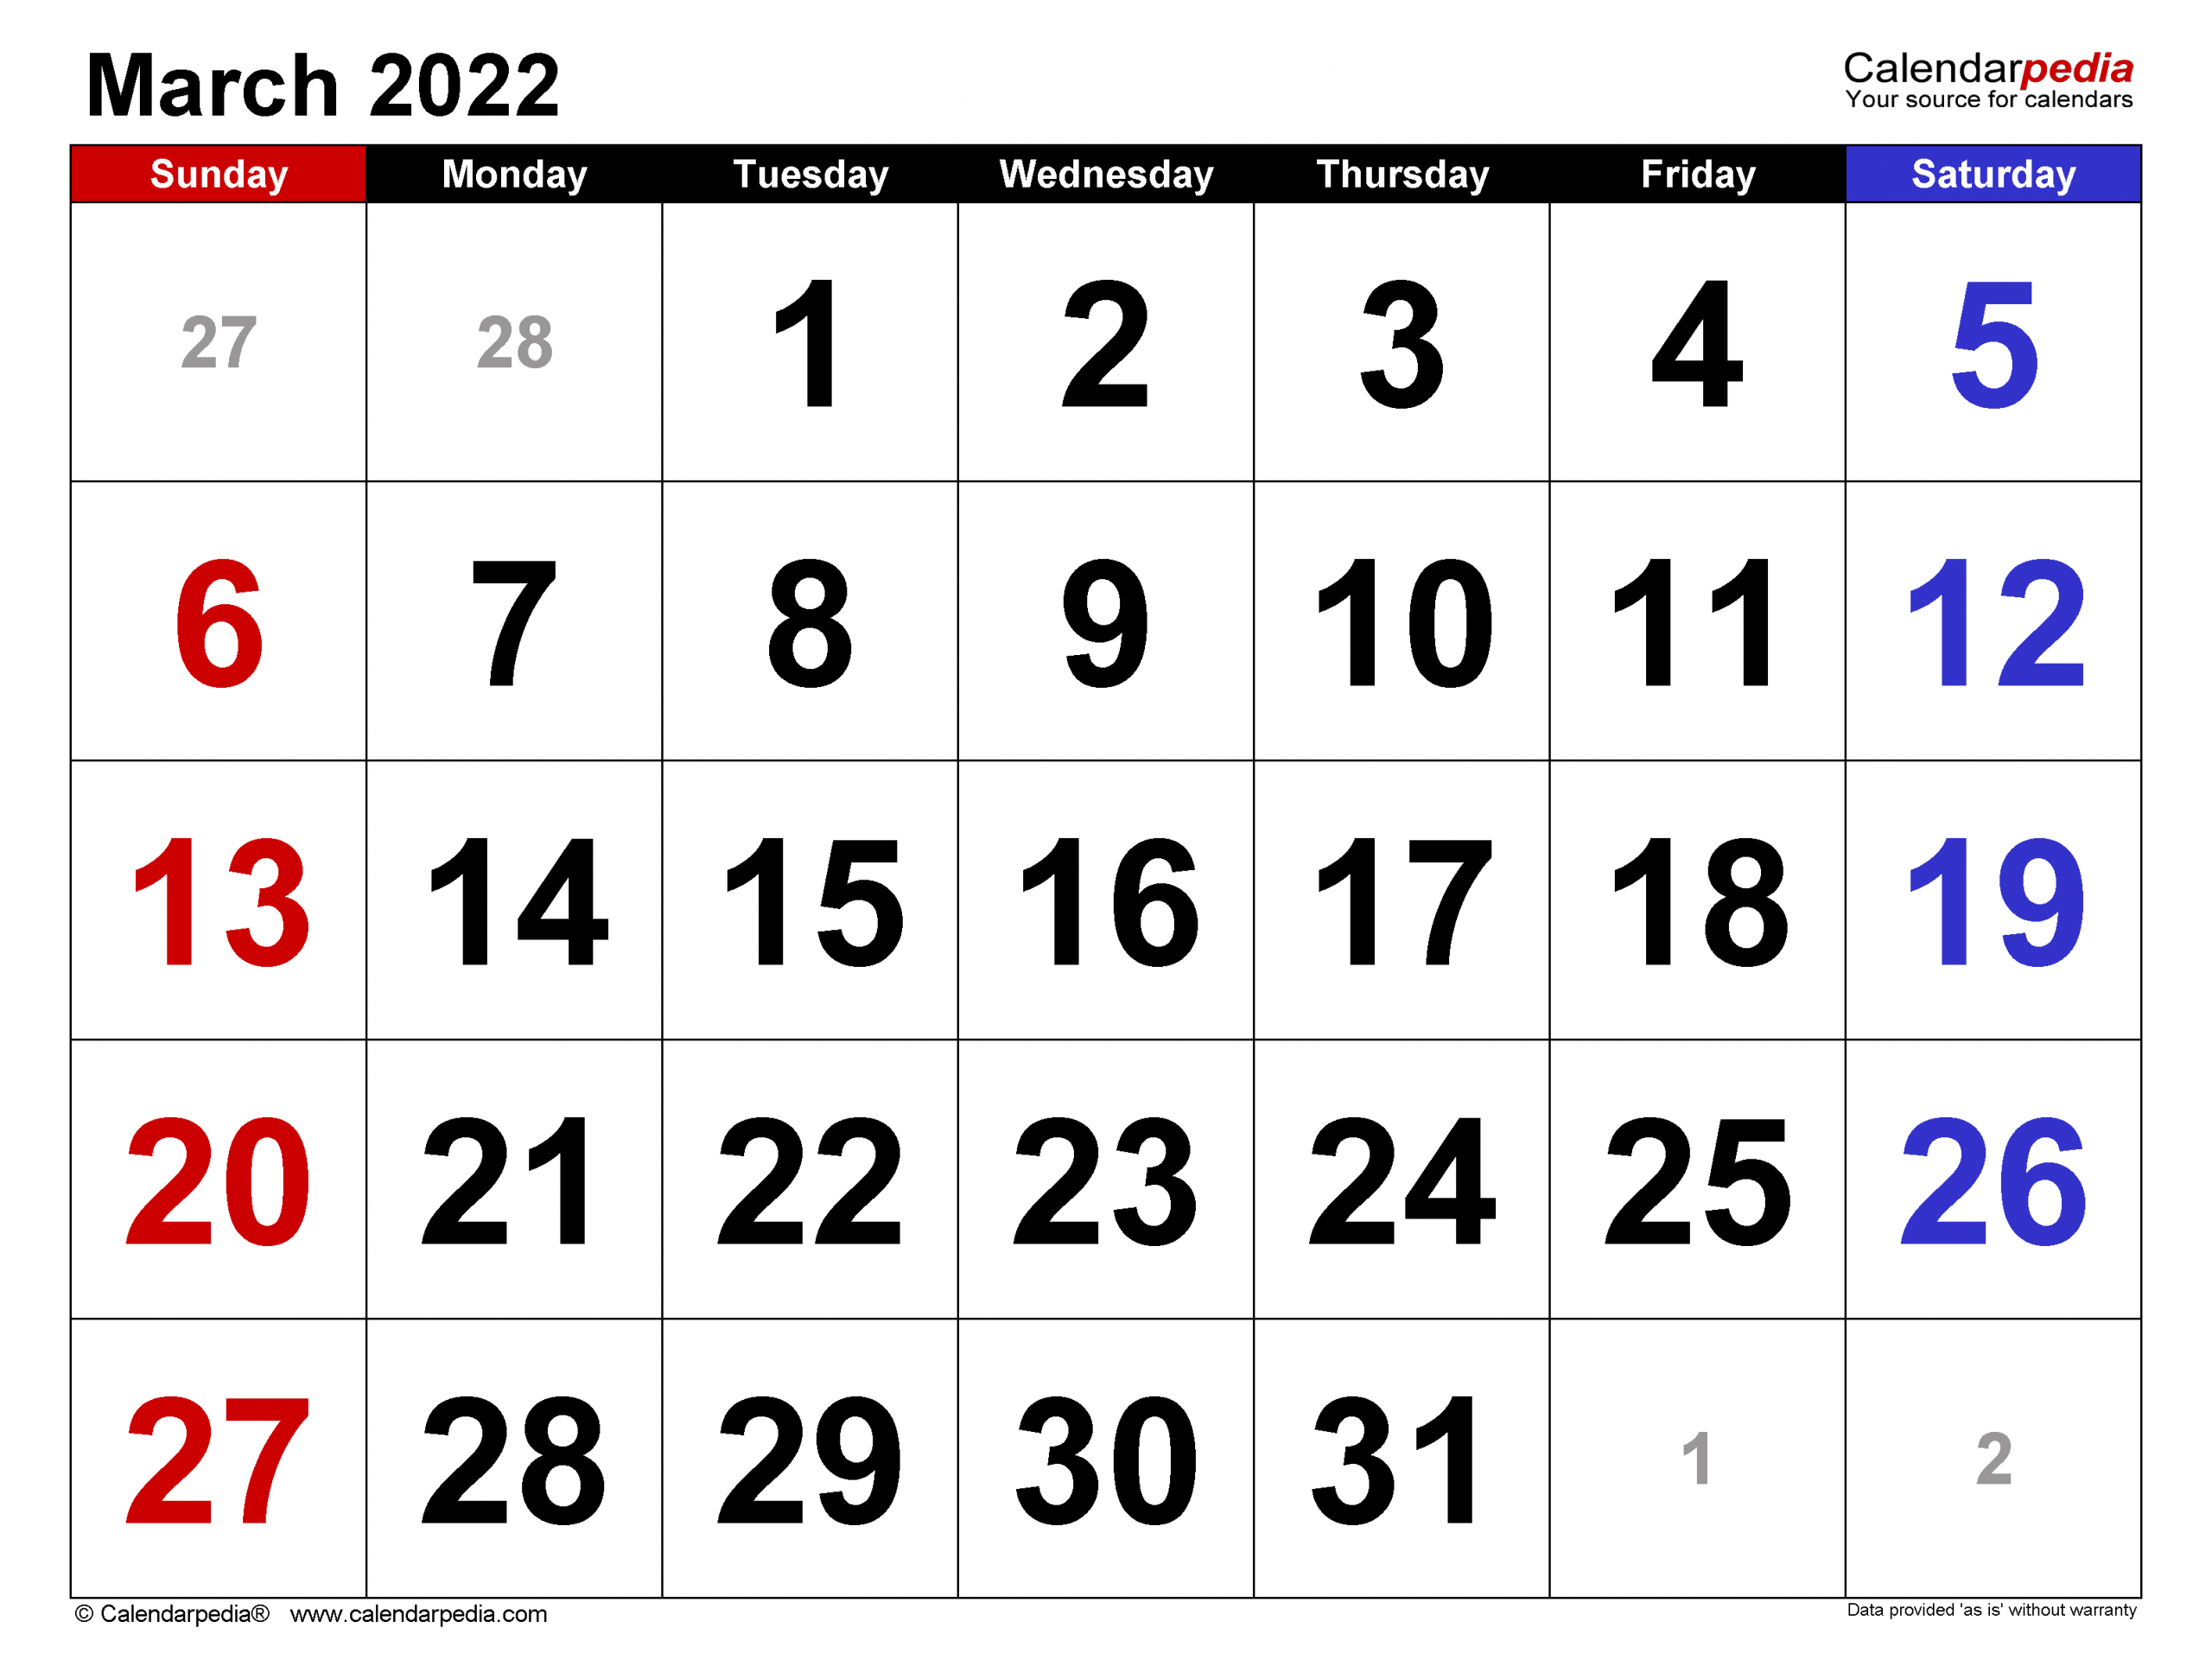 View 13 Monthly Calendar For March 2022 - Entranceviralbox